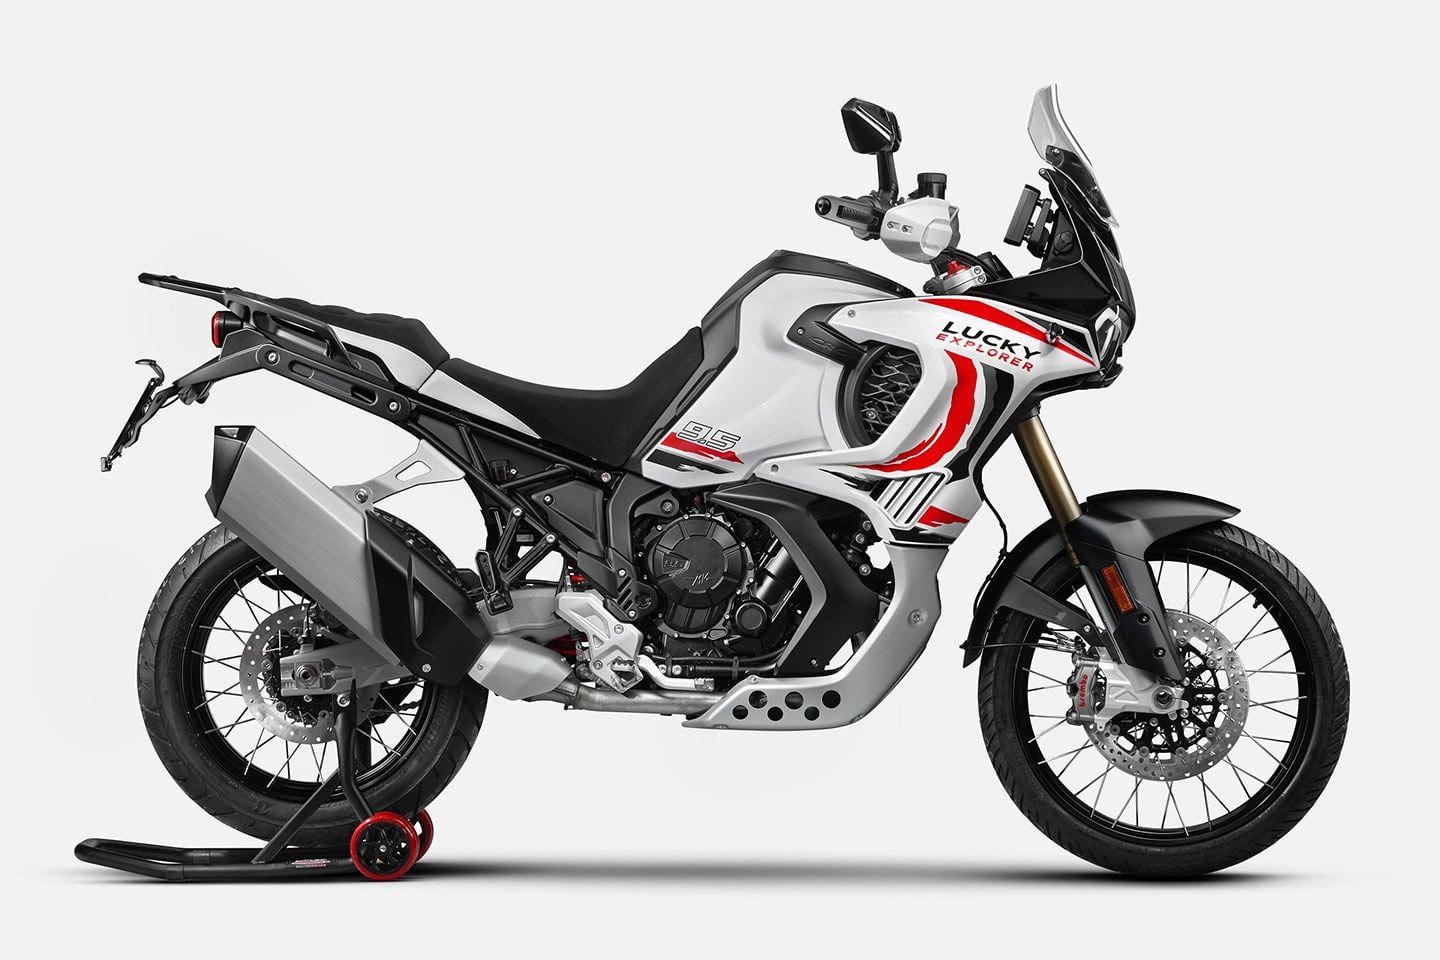 A new Lucky Explorer 9.5 will be powered by a new 931cc triple.